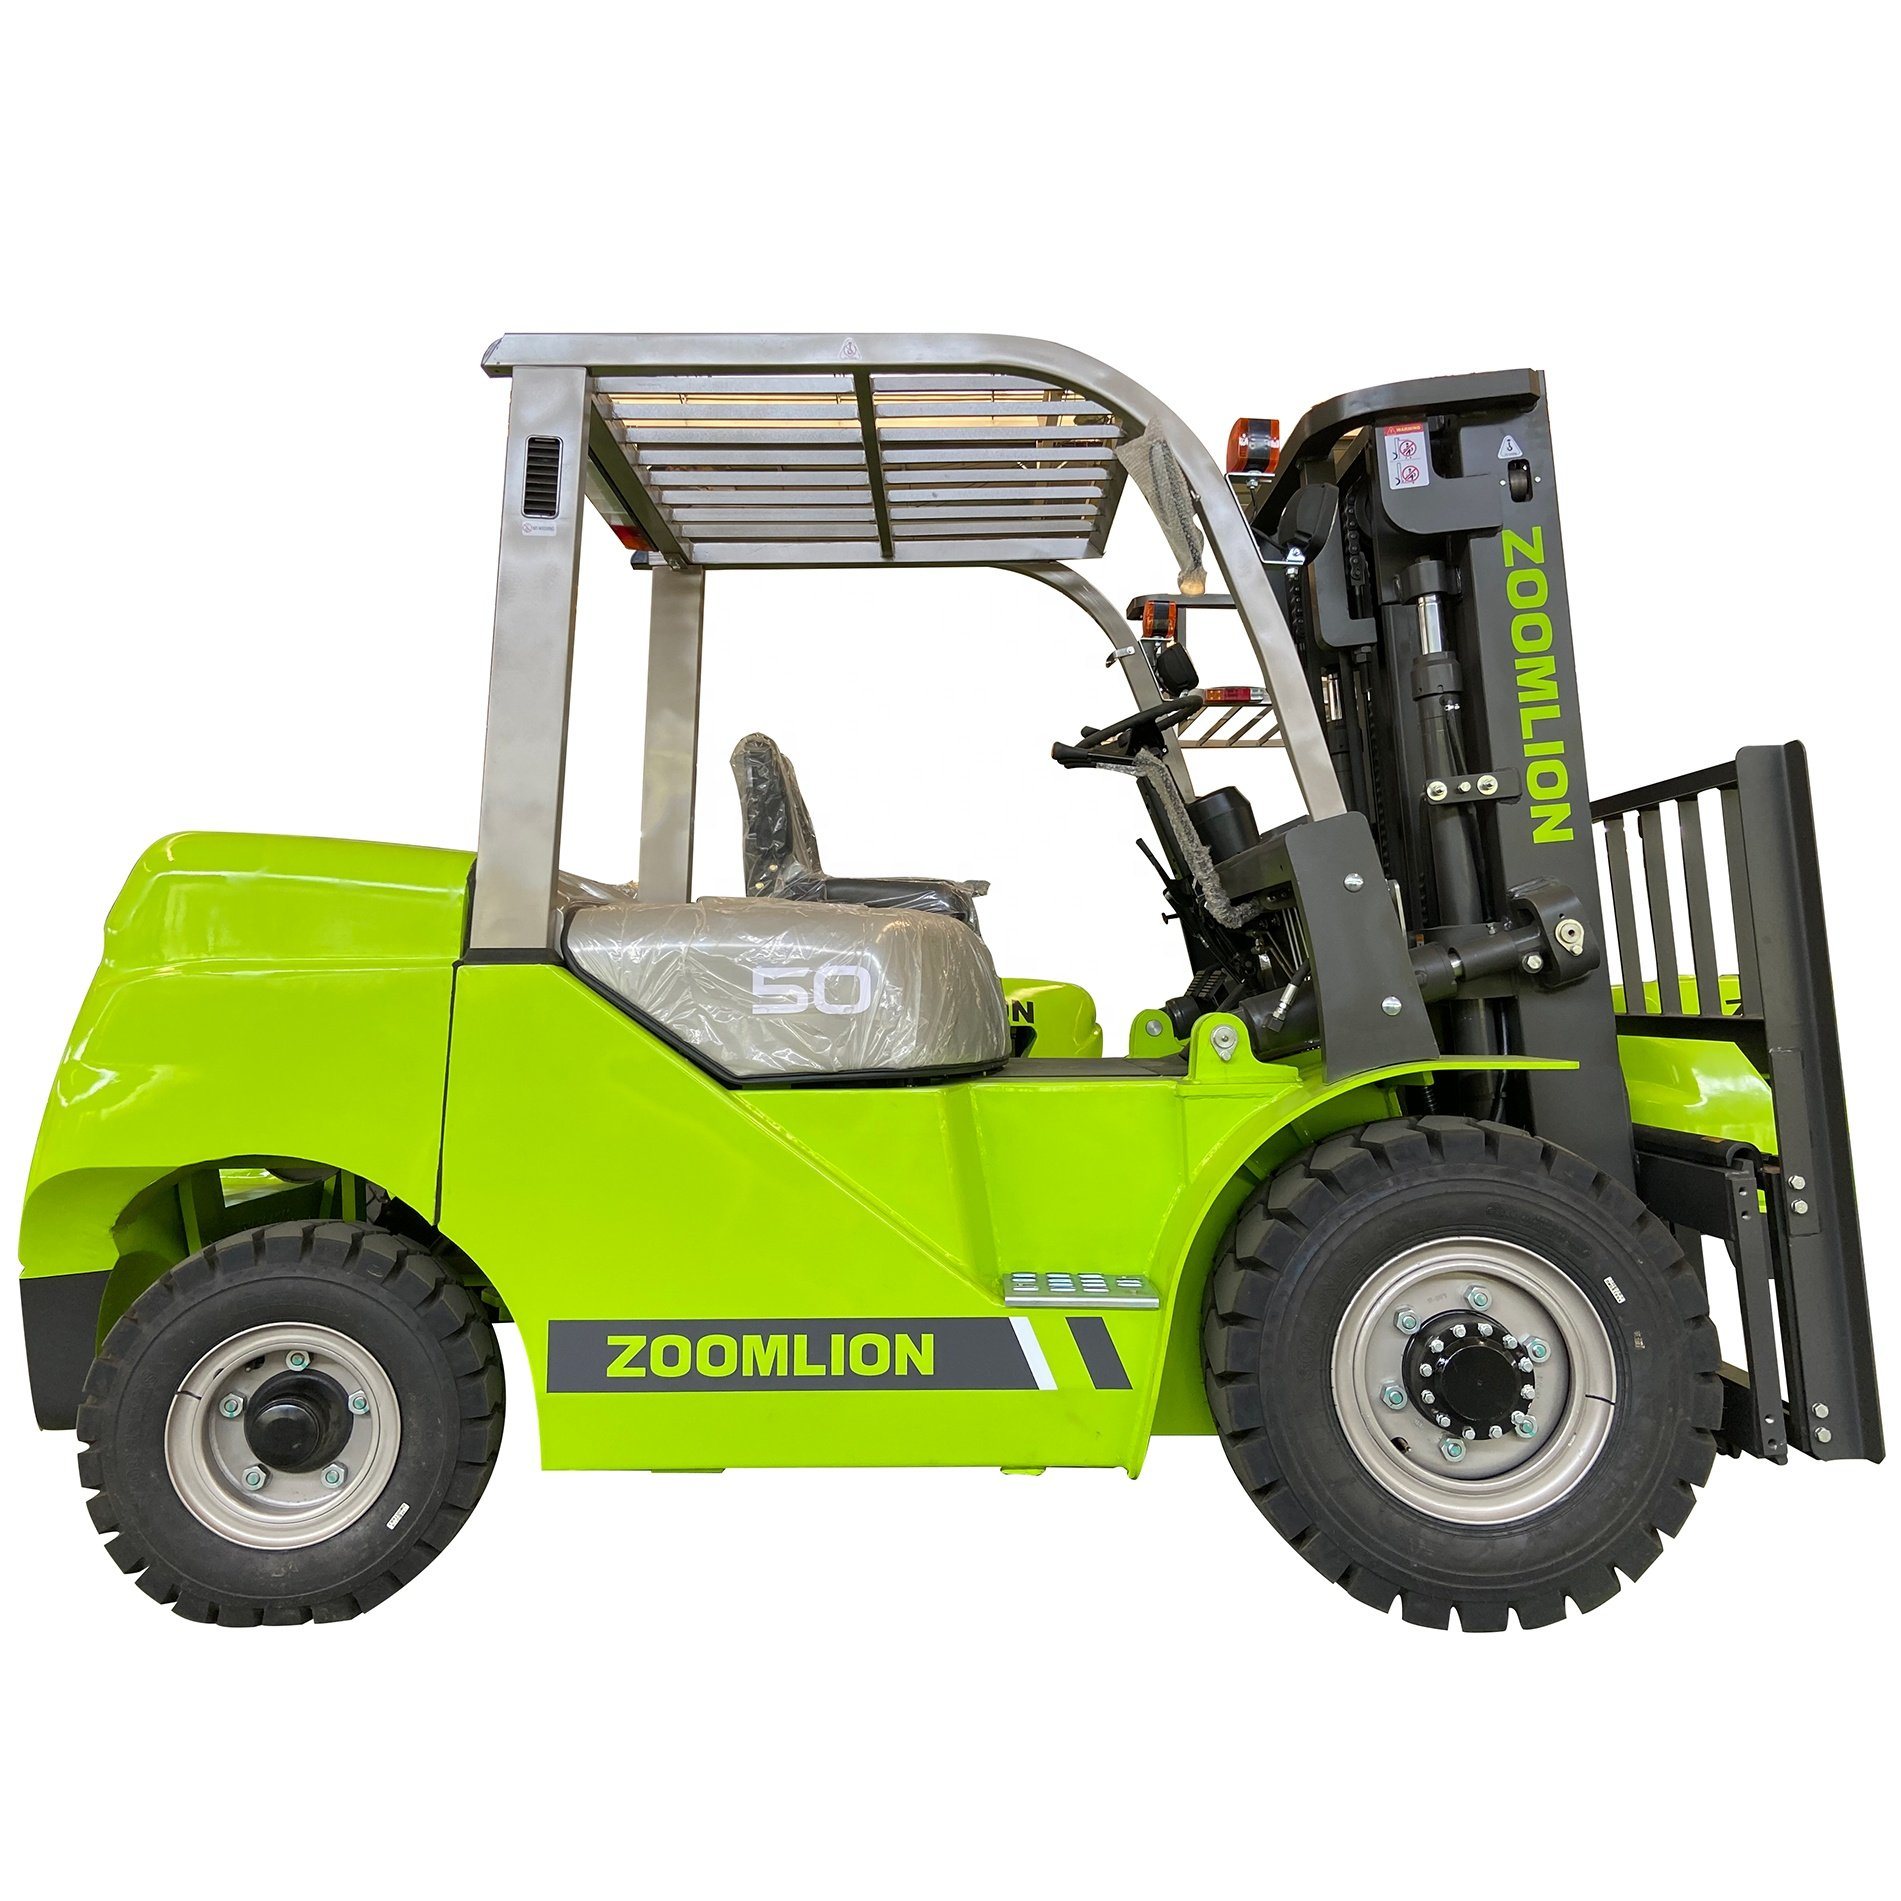 5 Ton Forklift Zoomlion Diesel Electric LPG Forklift Cpcd50 Fd50 with Lowest Price